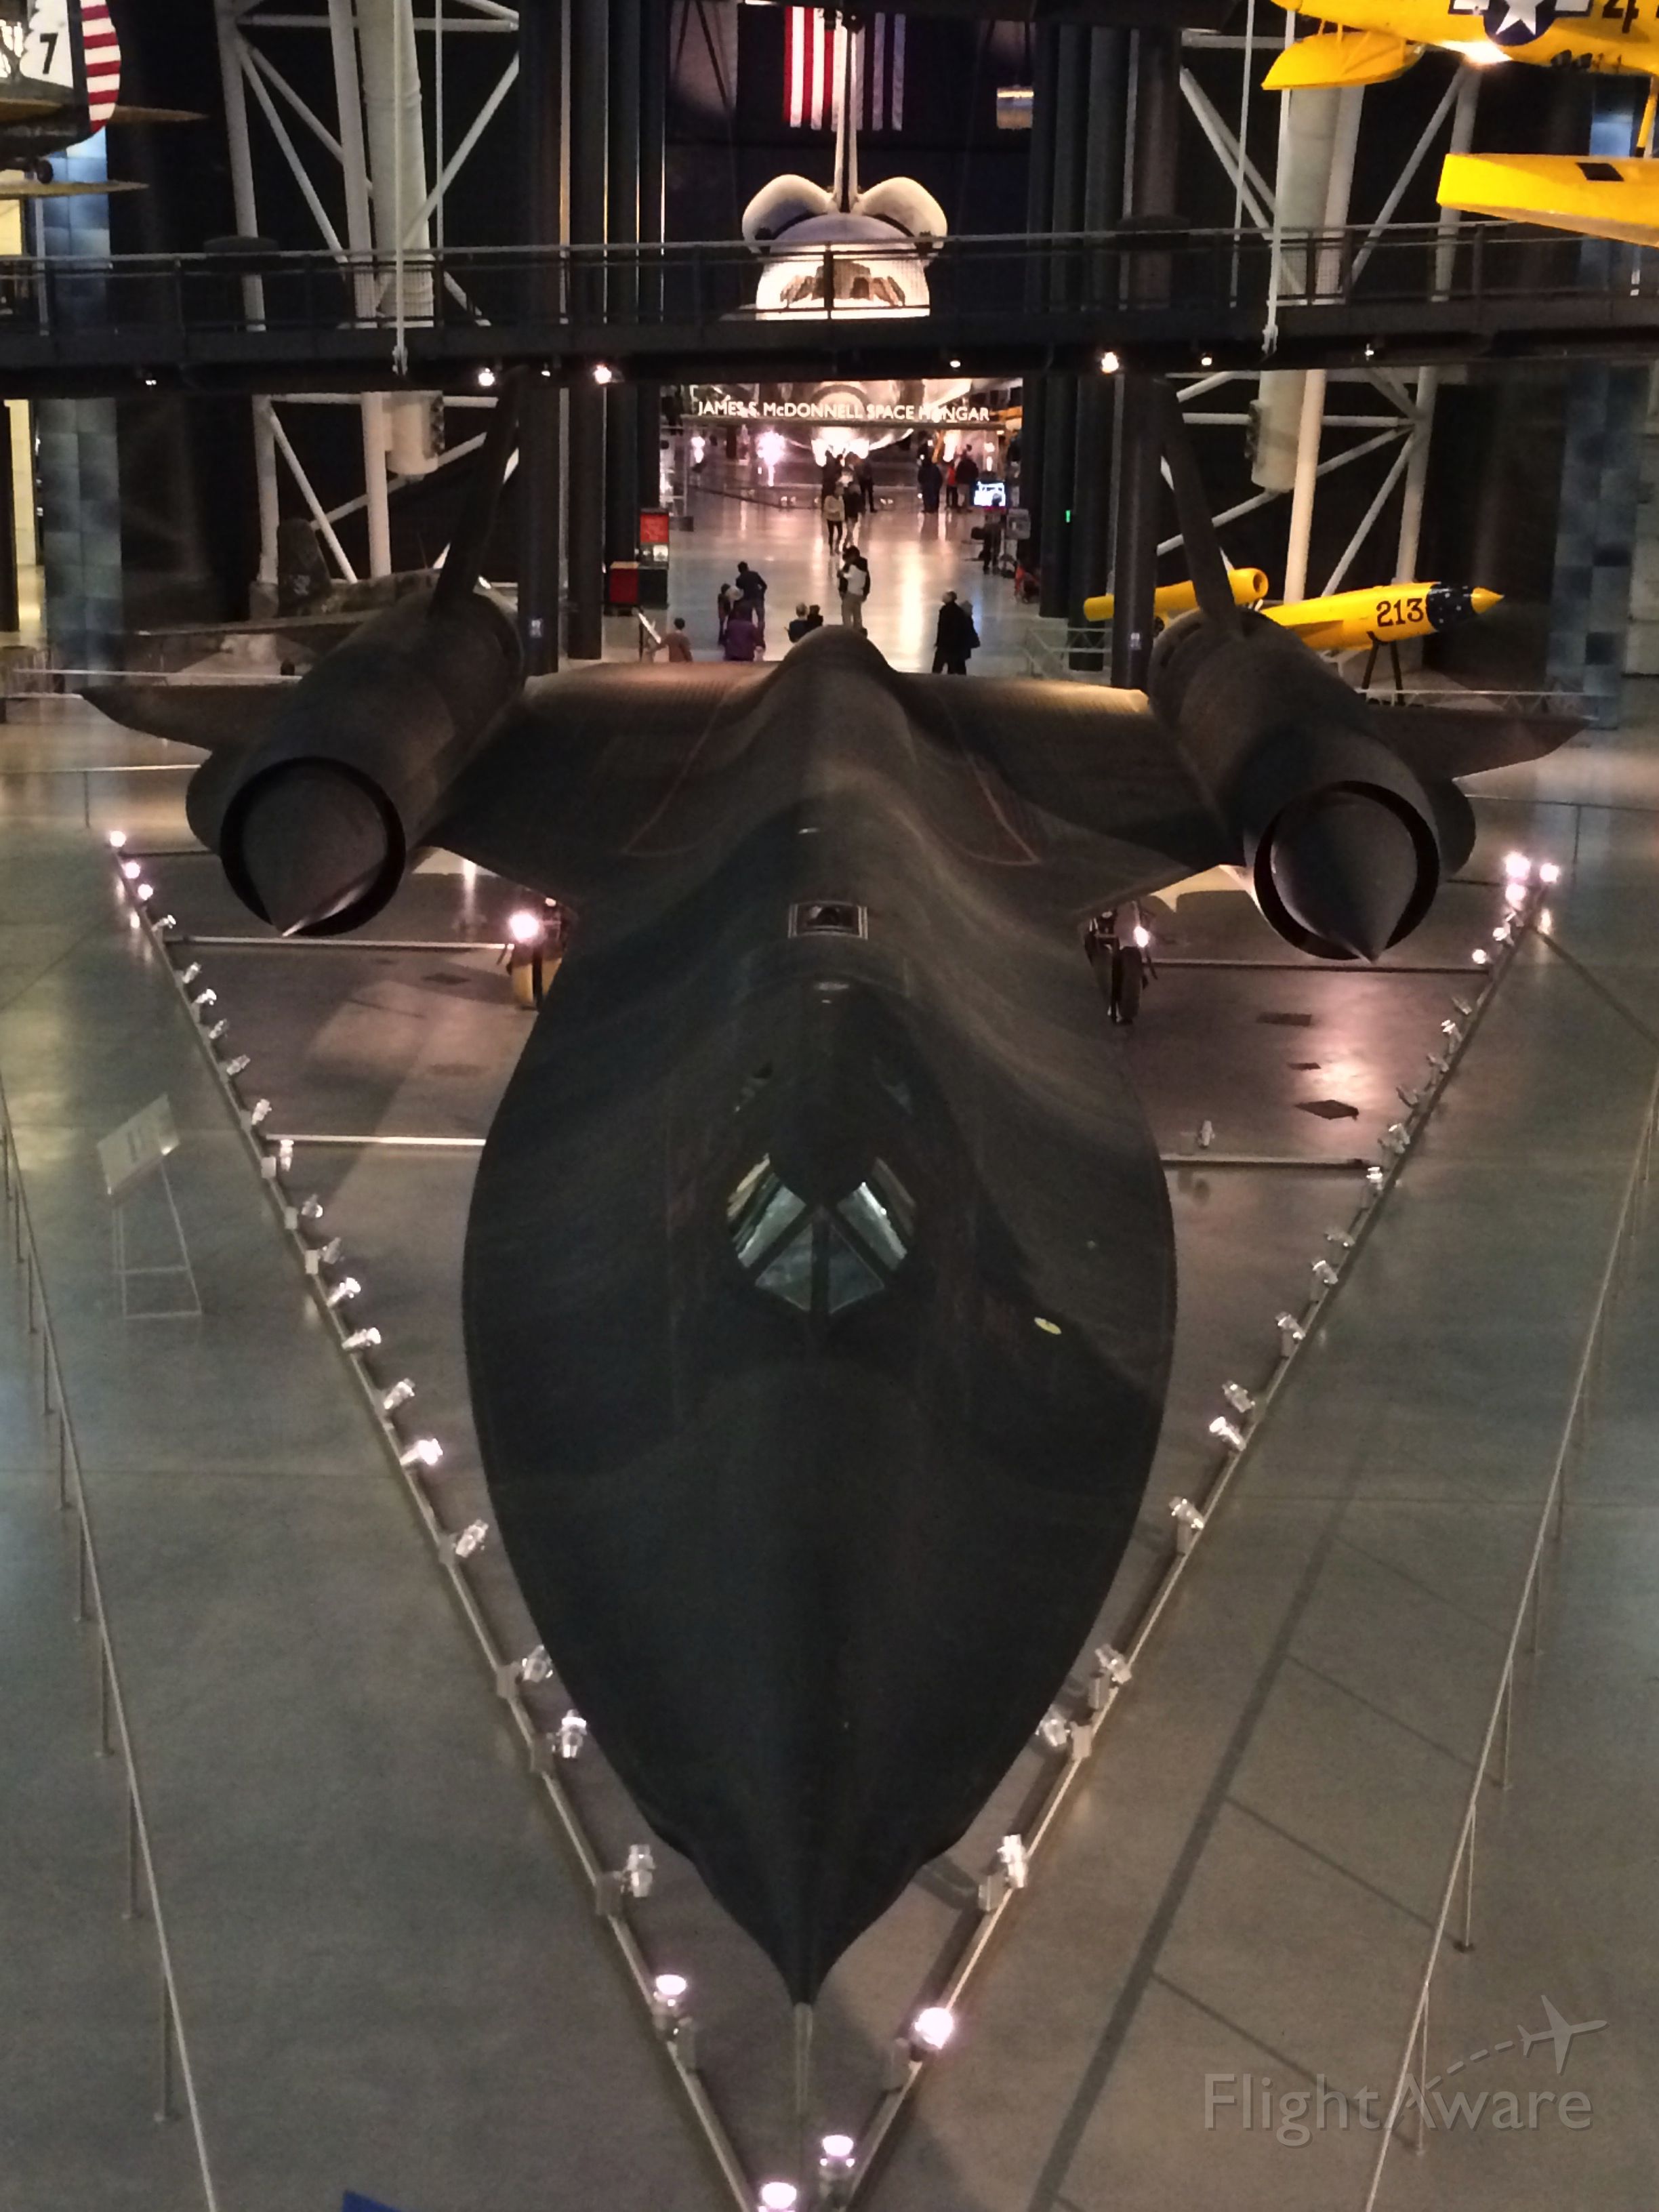 Lockheed Blackbird — - SR-71 with Discovery in the background at the Steven F. Udvar-Hazy Center, National Air and Space Museum in Chantilly, VA. 